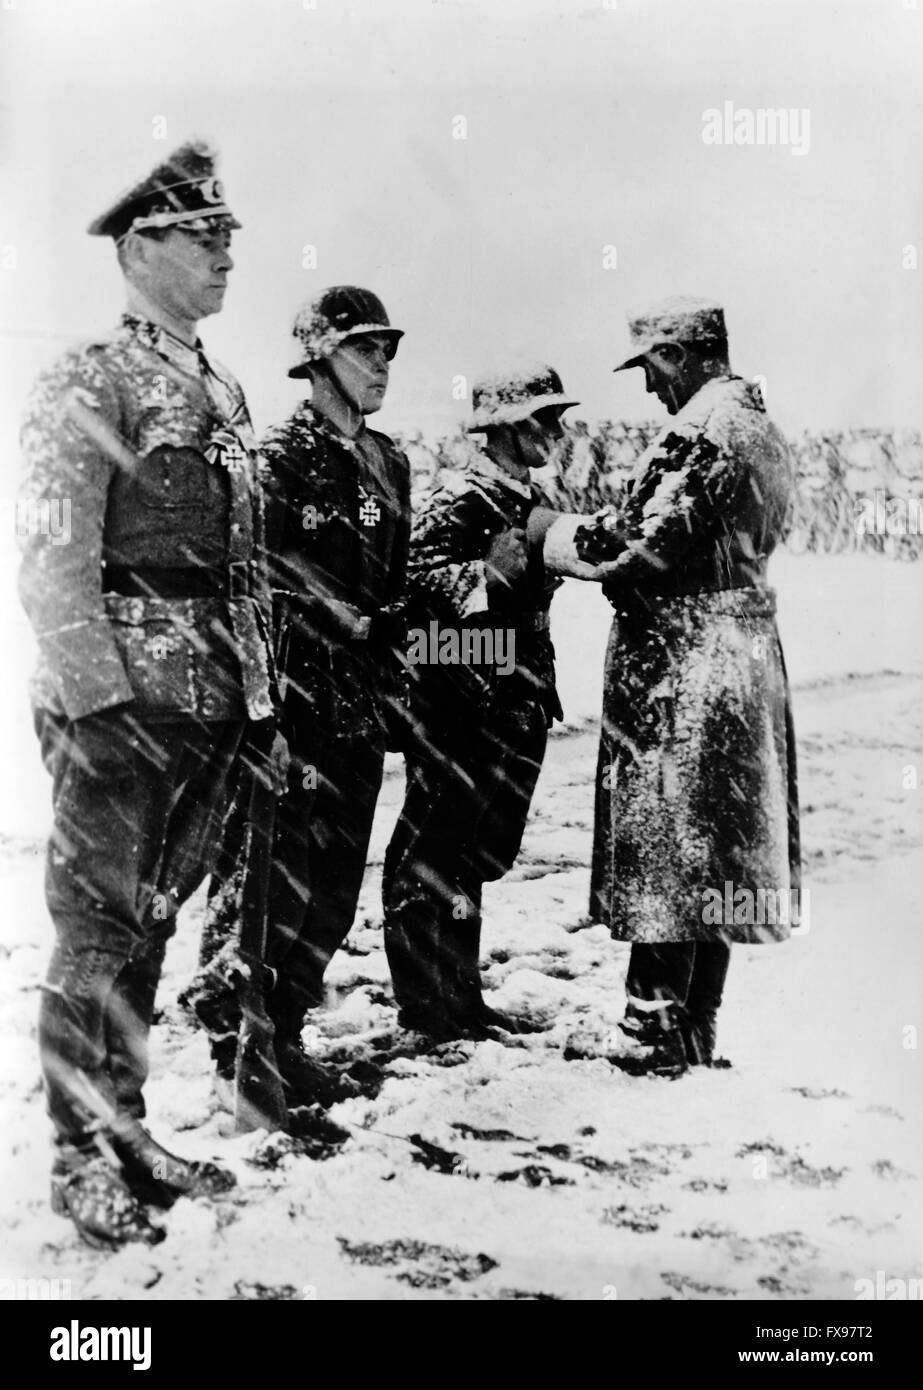 The Nazi propaganda image depicts the awarding of the Iron Cross to soldiers of the German Wehrmacht for their service in the partisan combat in Yugoslavia. The photo was taken in January 1944. Since summer 1942, the name 'partisan' had been prohibited by the Germans and replaced by the name 'Banden' (gangs), 'Banditen' (bandits), and 'Bandenbekaempfung' (fighting gangs). Fotoarchiv für Zeitgeschichtee - NO WIRE SERVICE - Stock Photo